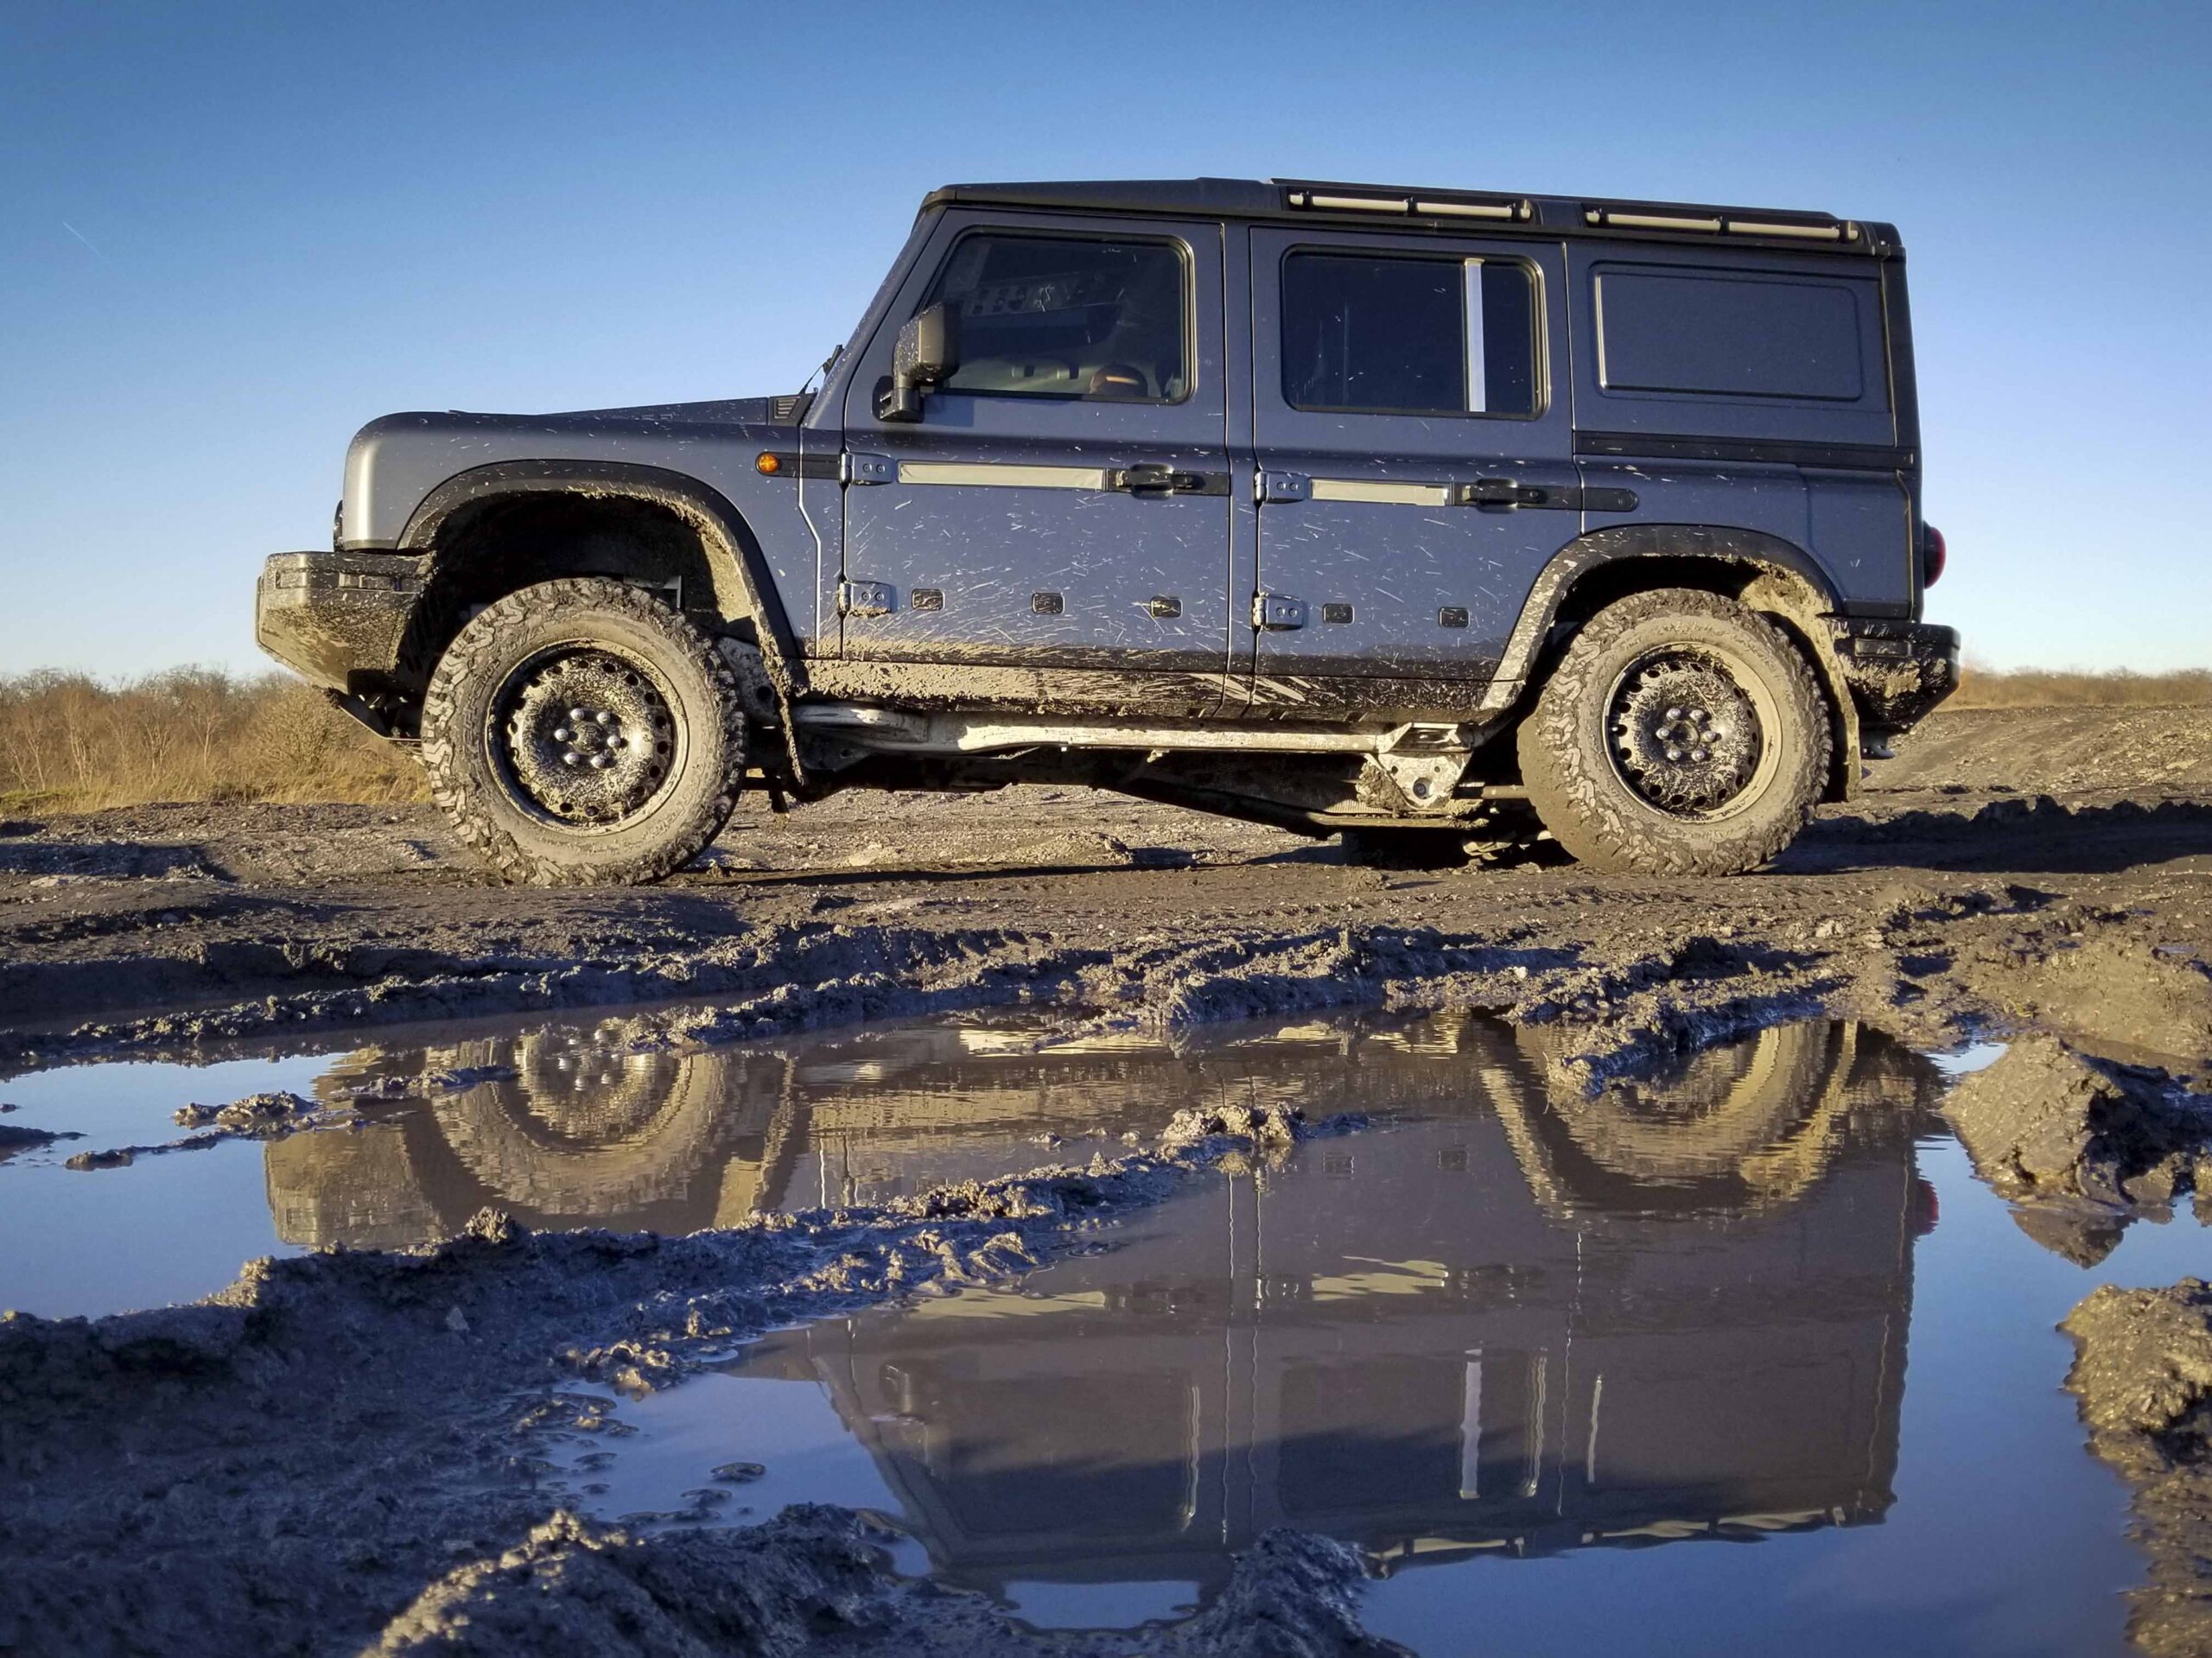 A prototype INEOS Grenadier is parked next to a mud puddle.